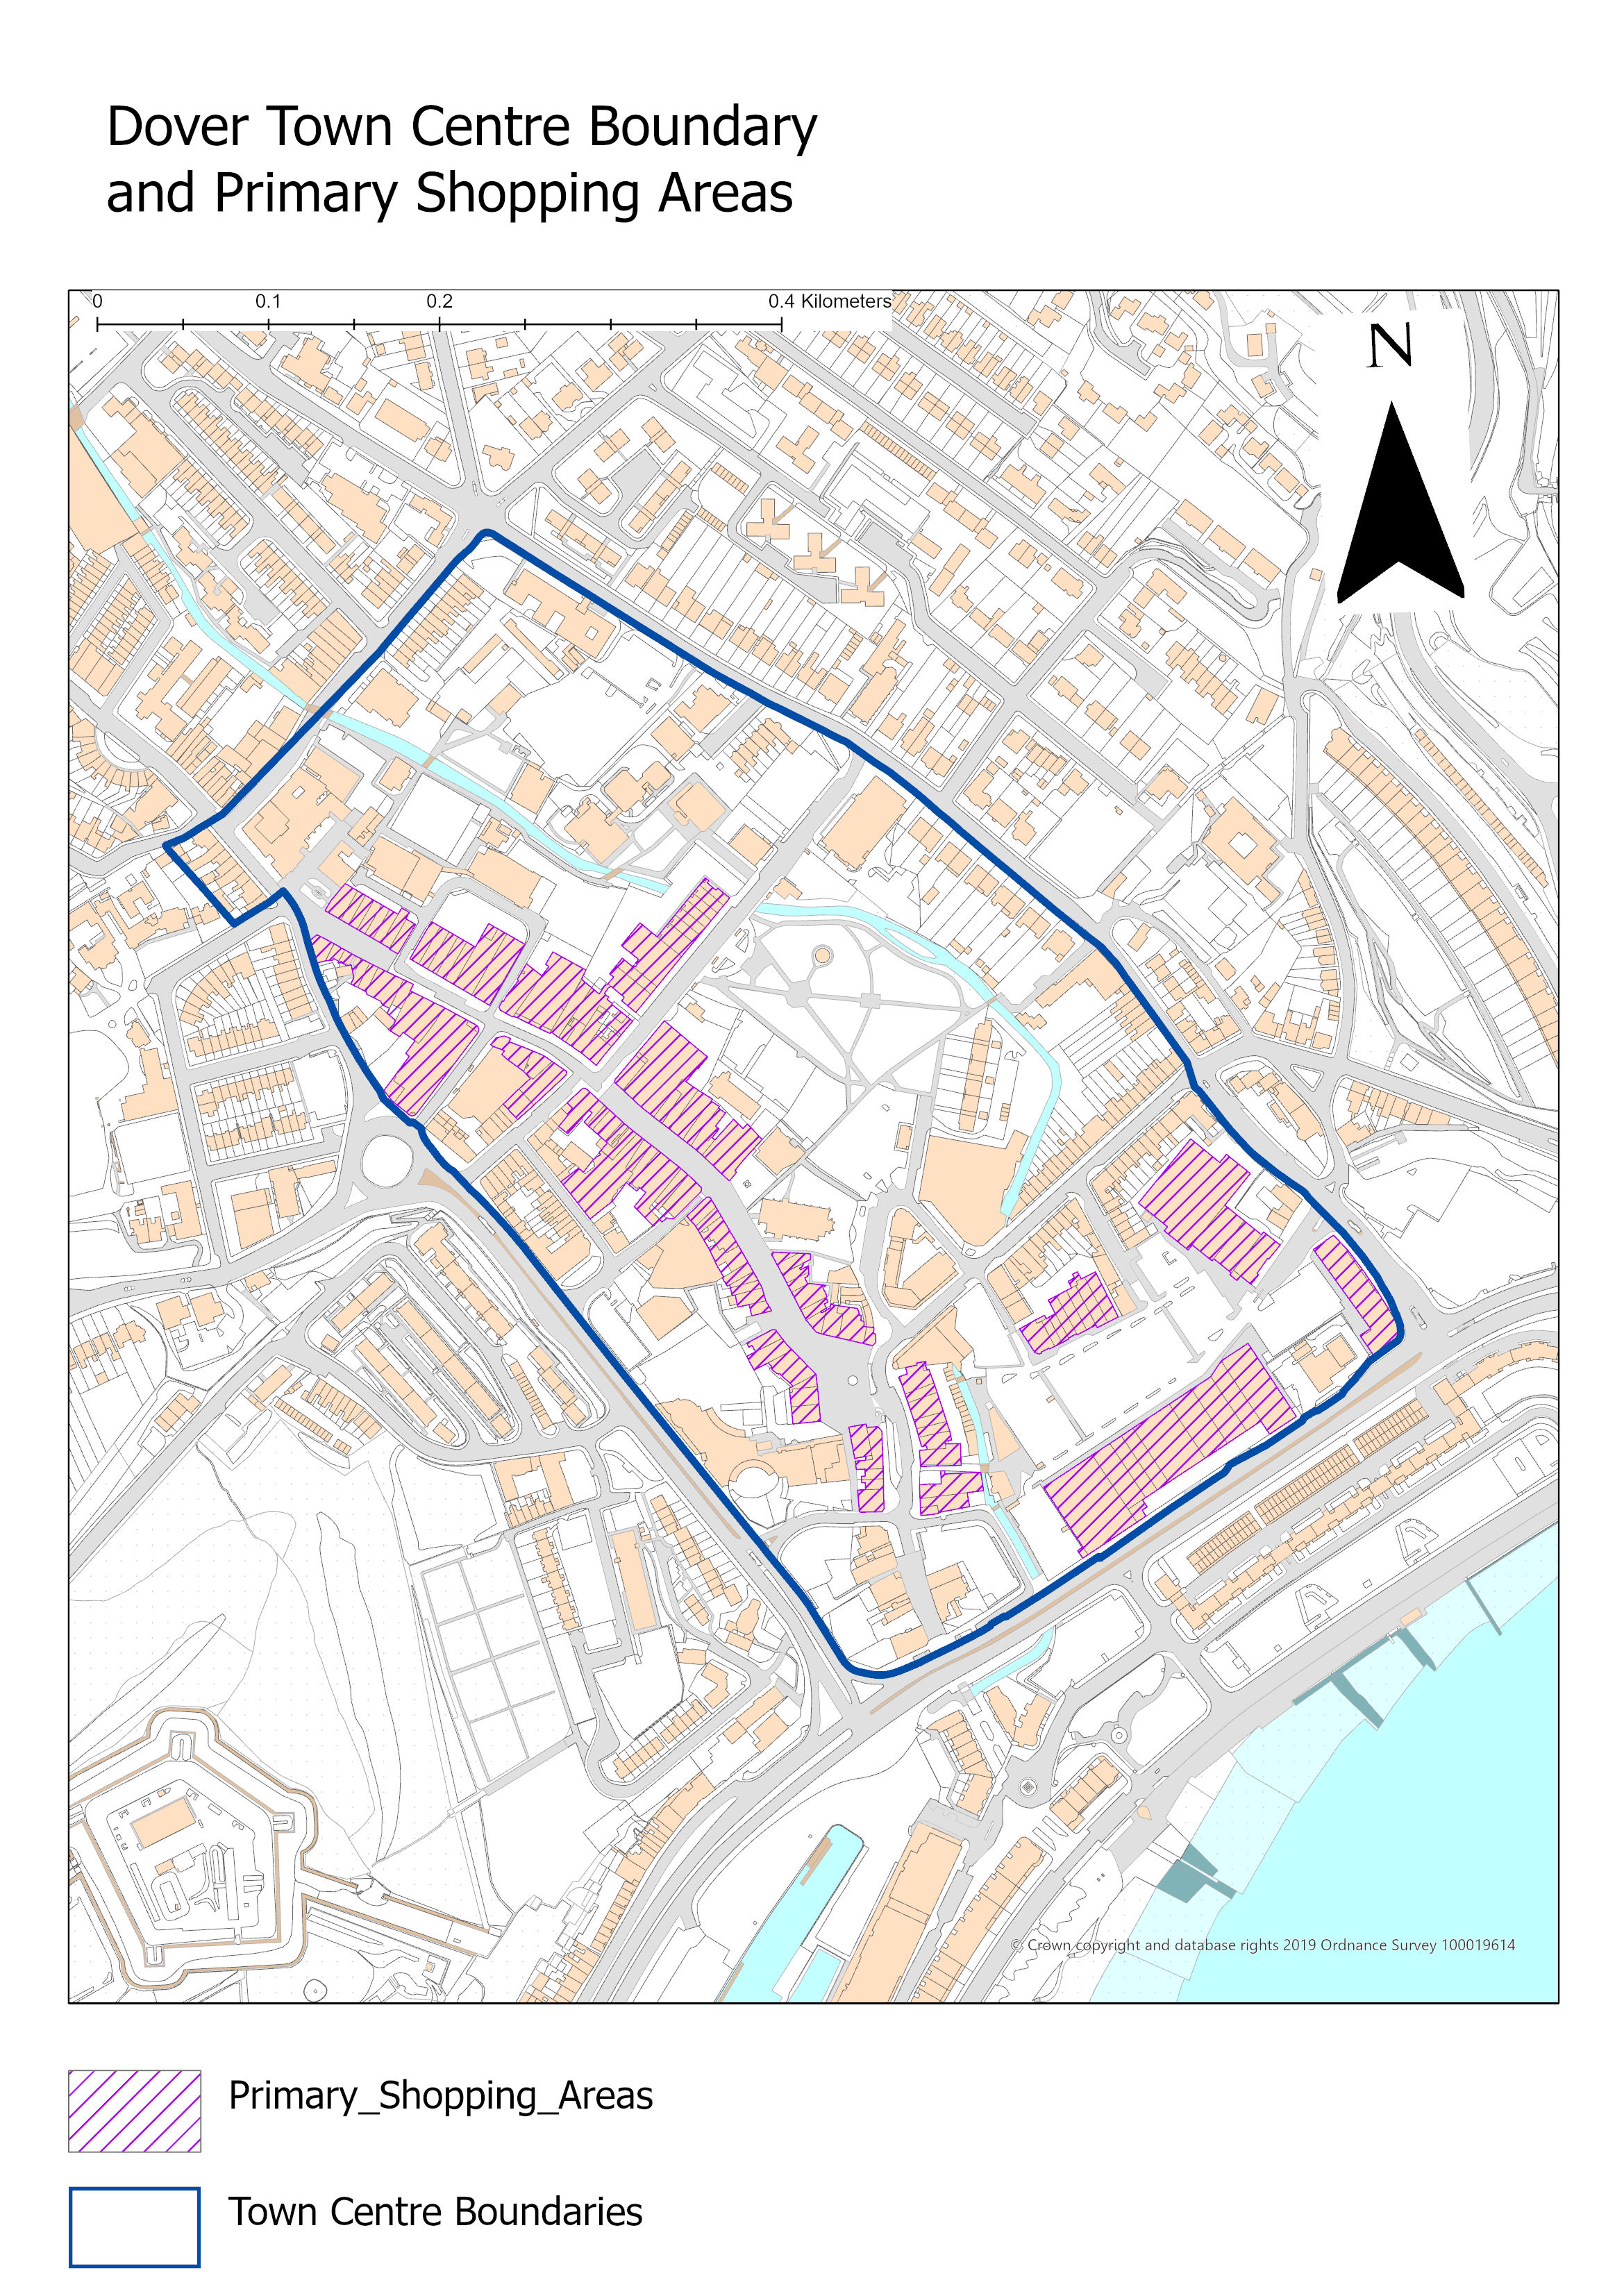 Dover Town Centre Primary Shopping Areas and Town Centre Boundaries